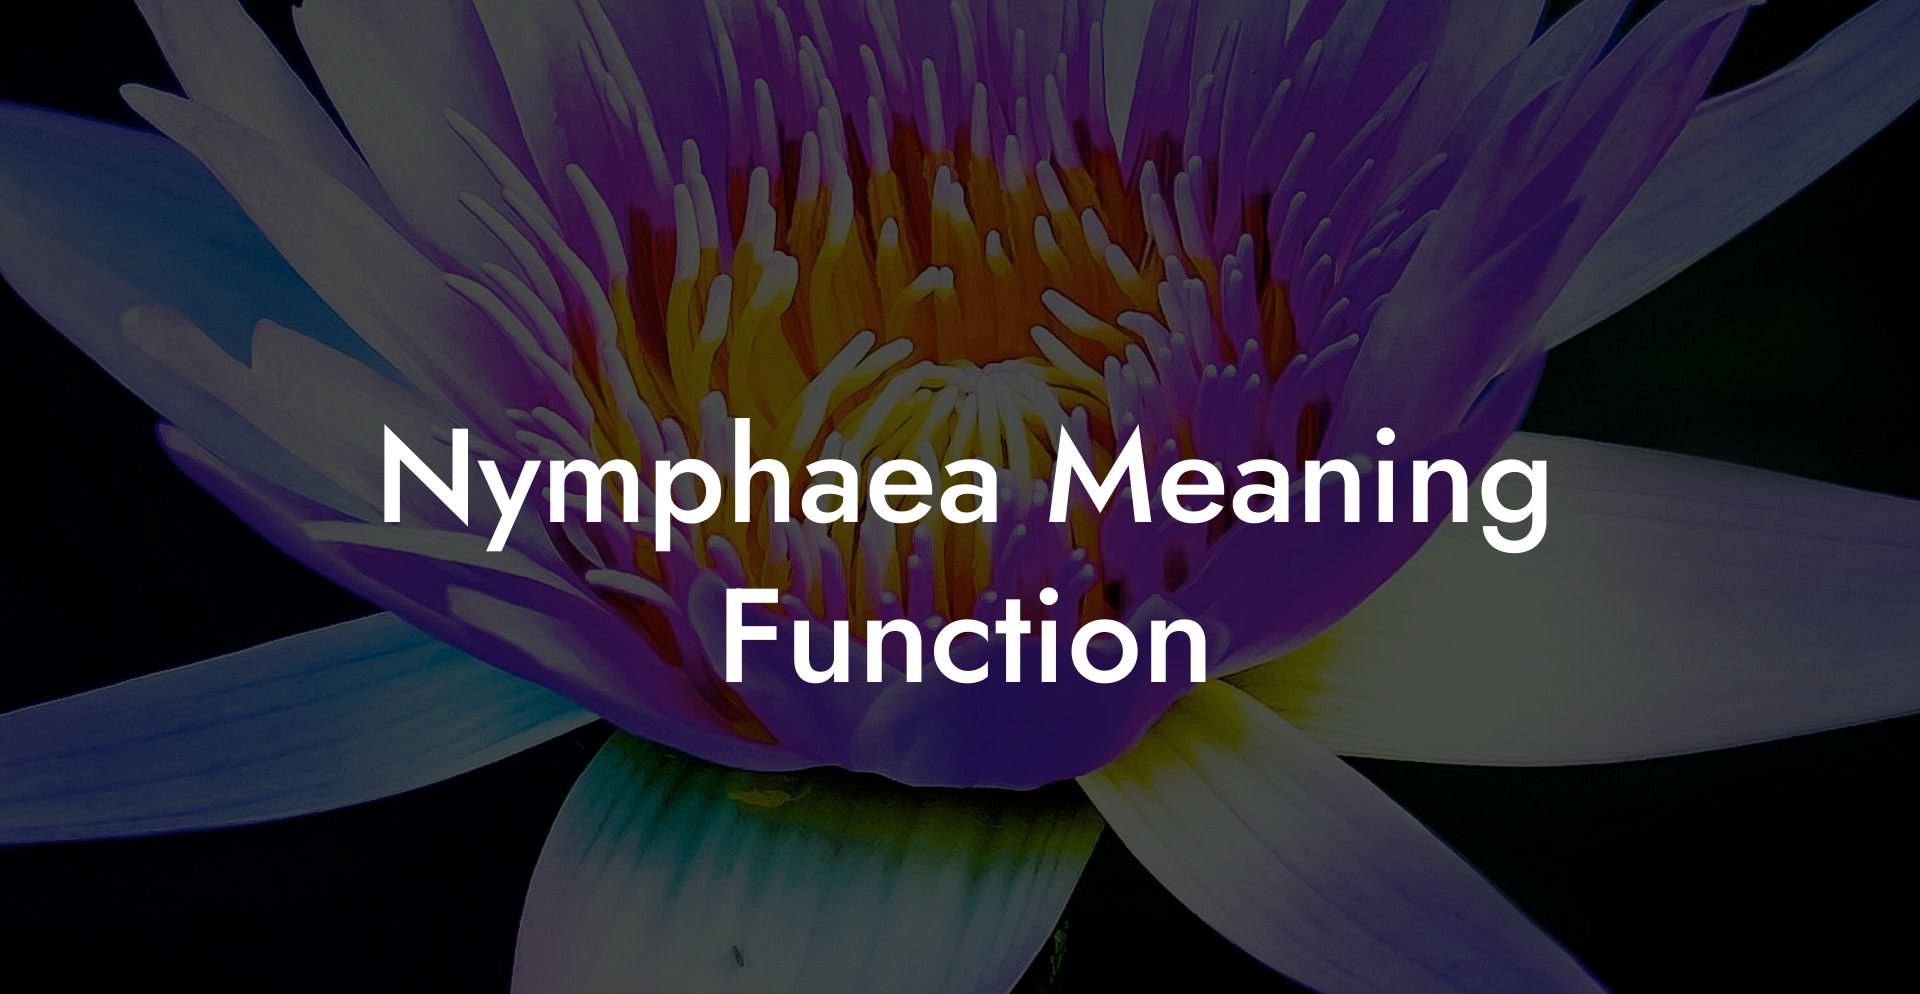 Nymphaea Meaning Function